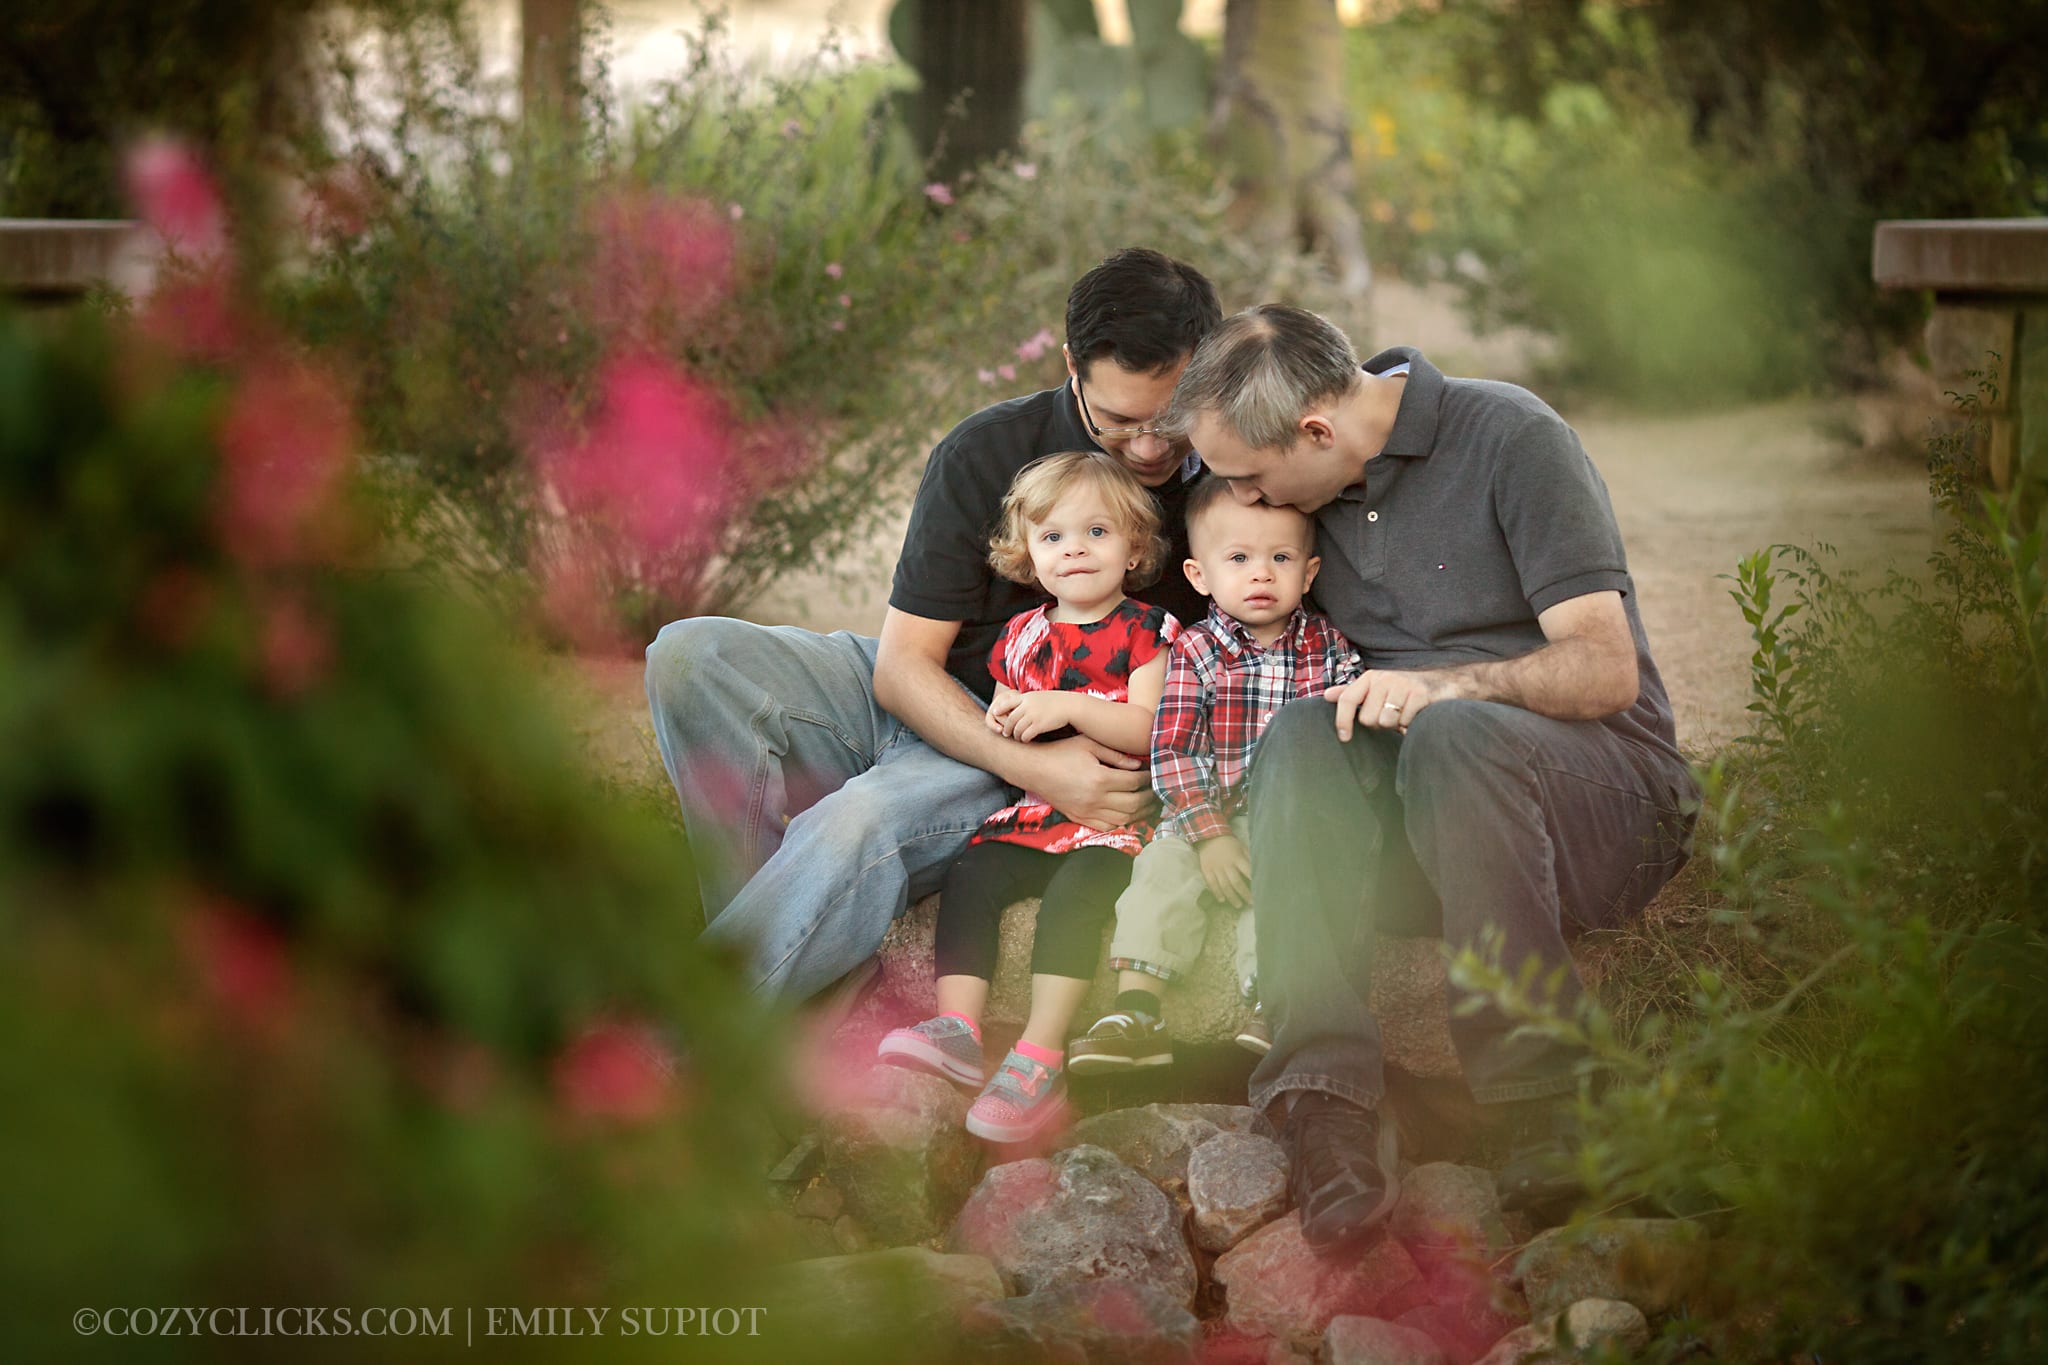 Same sex family portraits in Phoenix, AZ. Two dads and twin toddlers